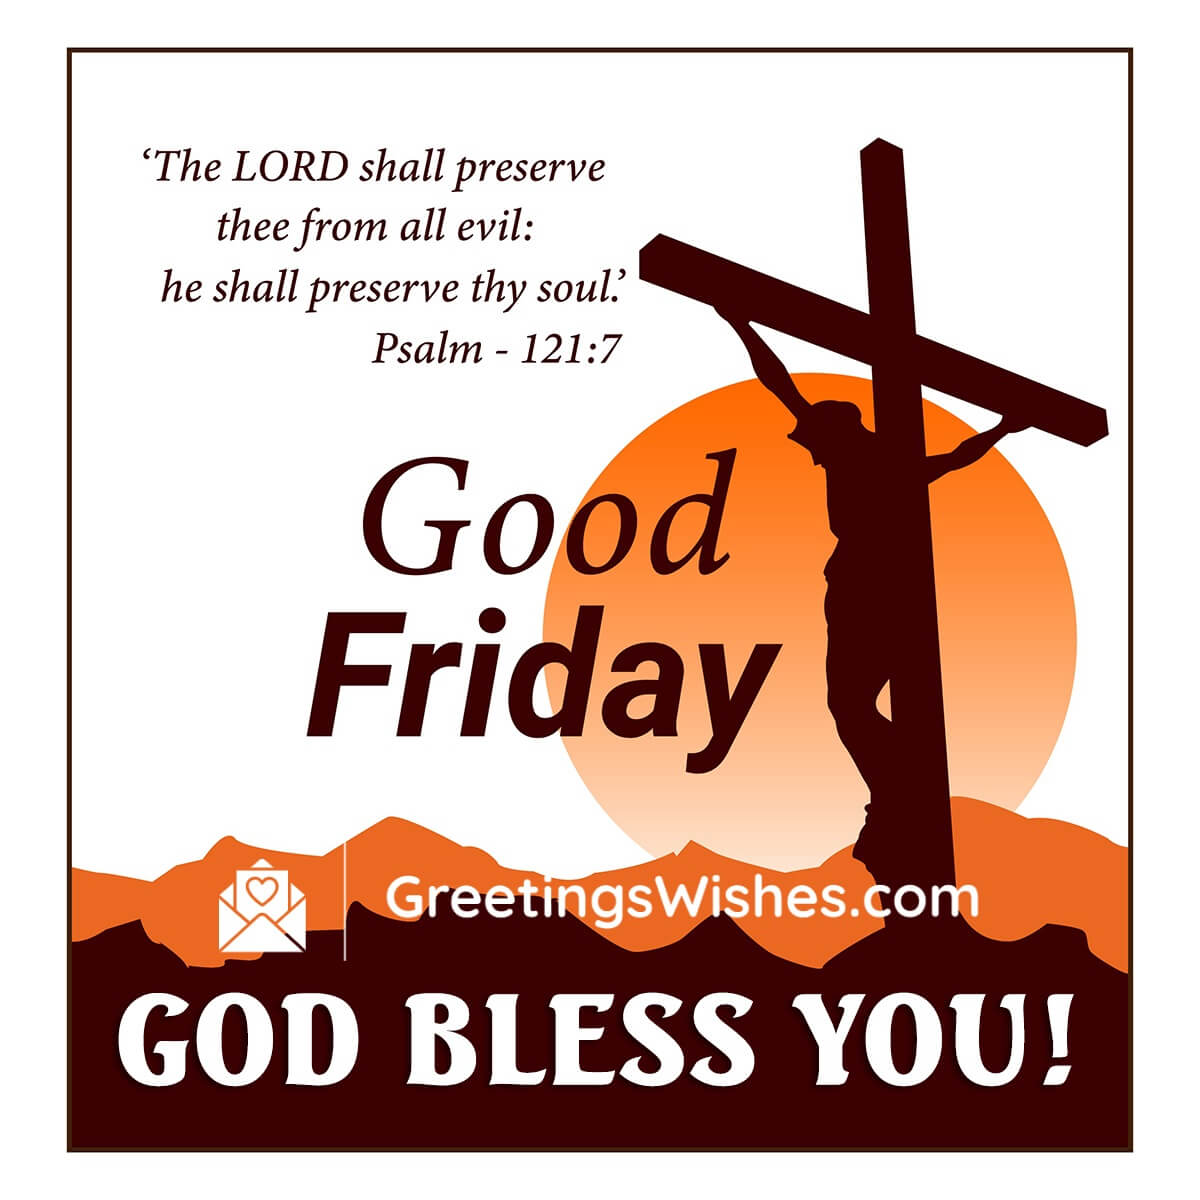 Good Friday Wishes, Messages & Bible verses ( 29 March ) - Greetings Wishes